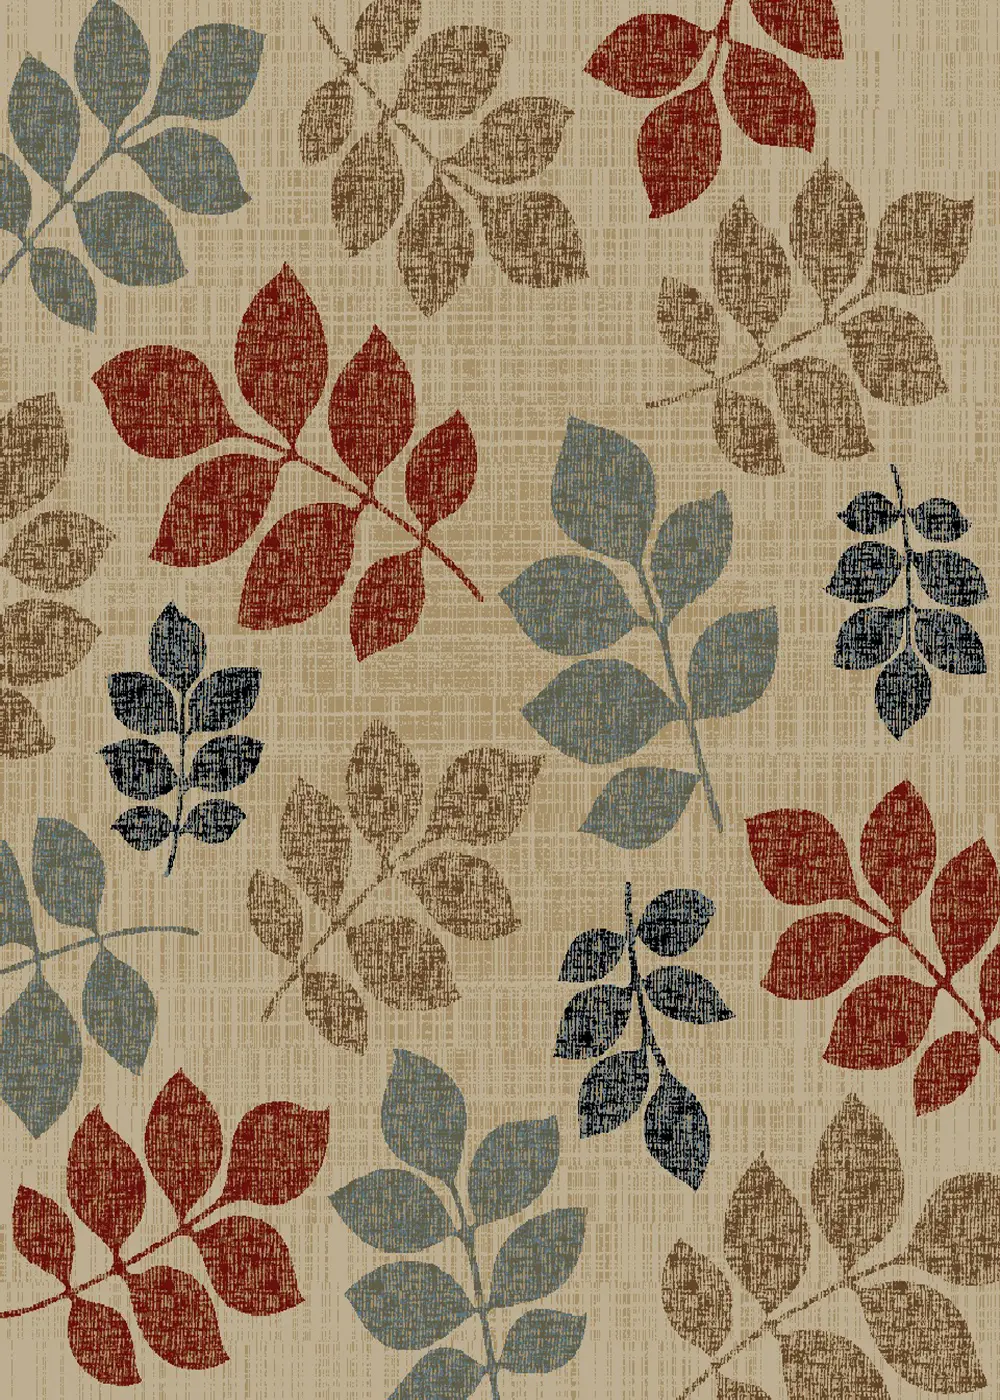 5 x 7 Medium Leaves of Color Ivory, Red, and Blue Rug - Timeless-1